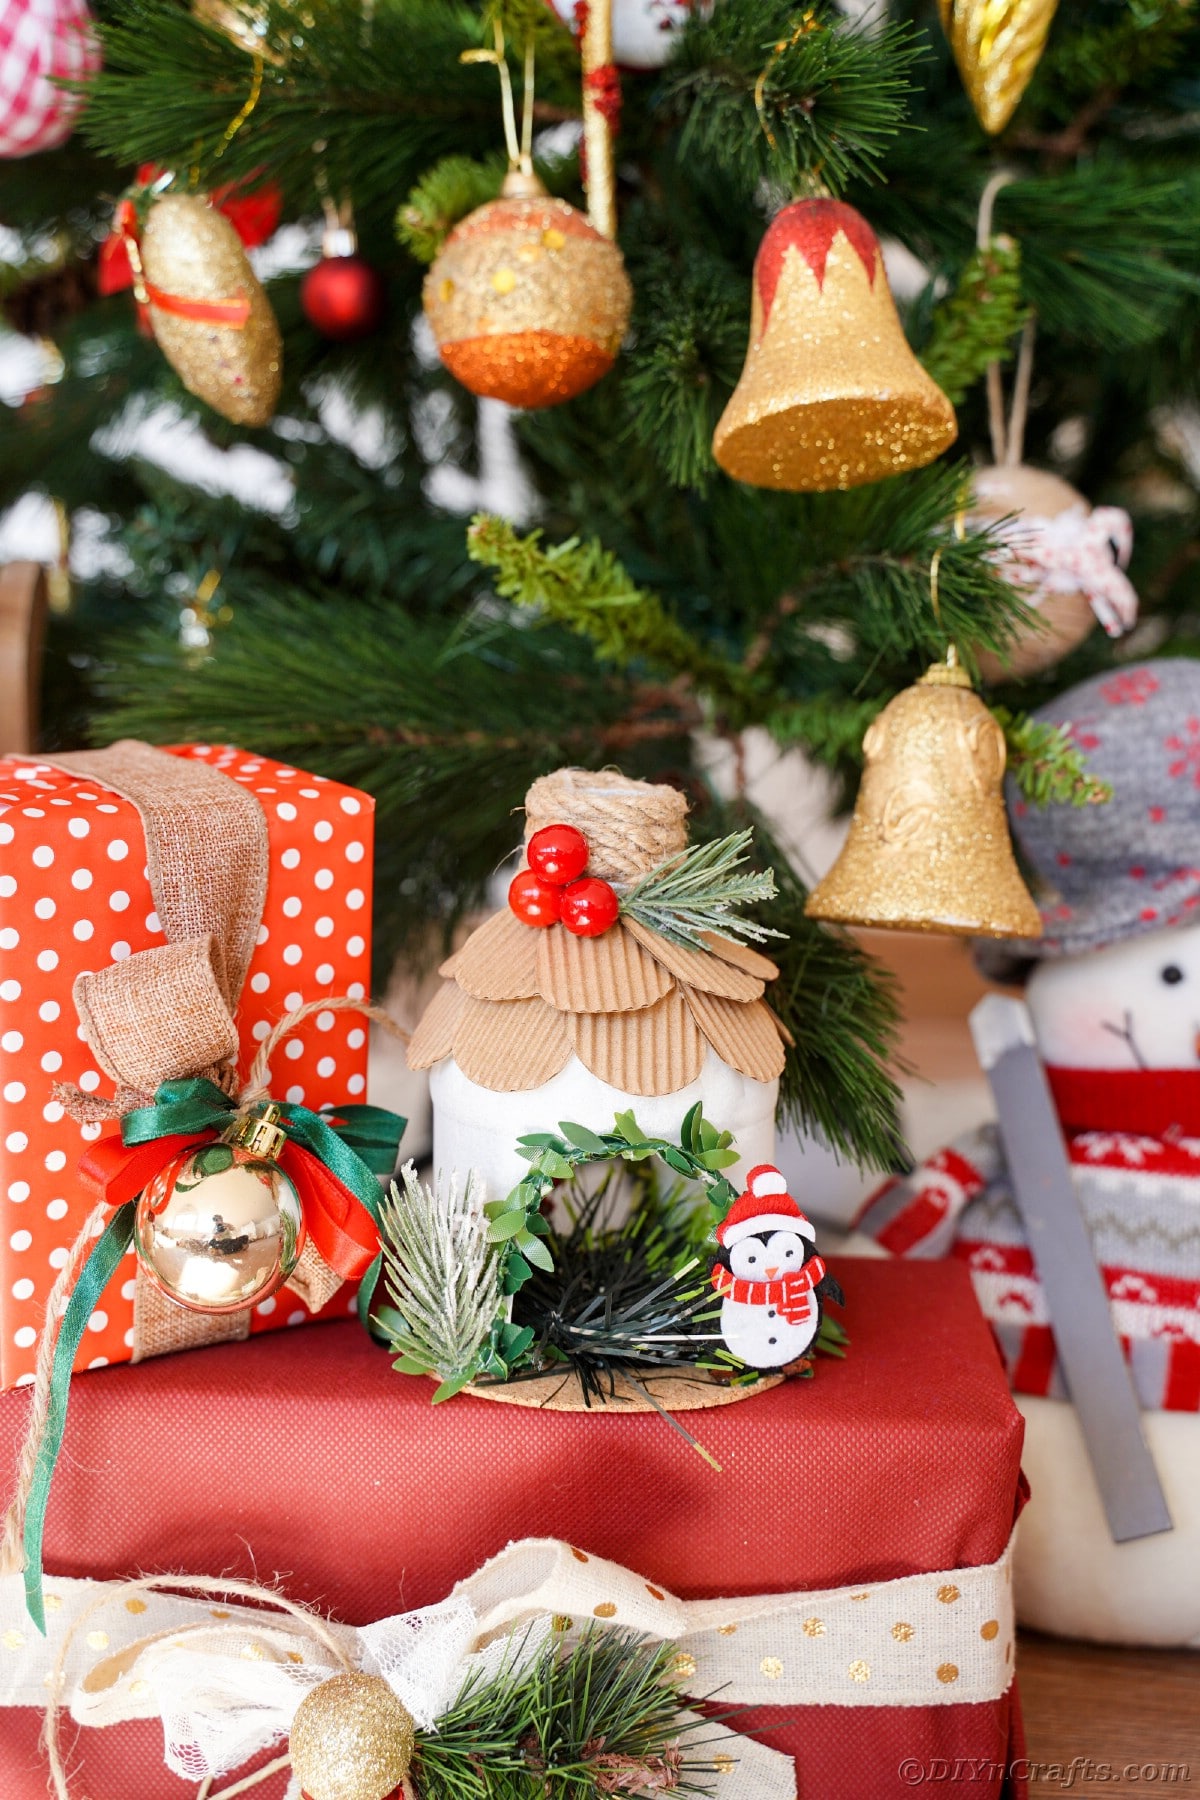 Christmas tree with bell ornaments in background with red and white polka dot and solid red boxes in front of tree